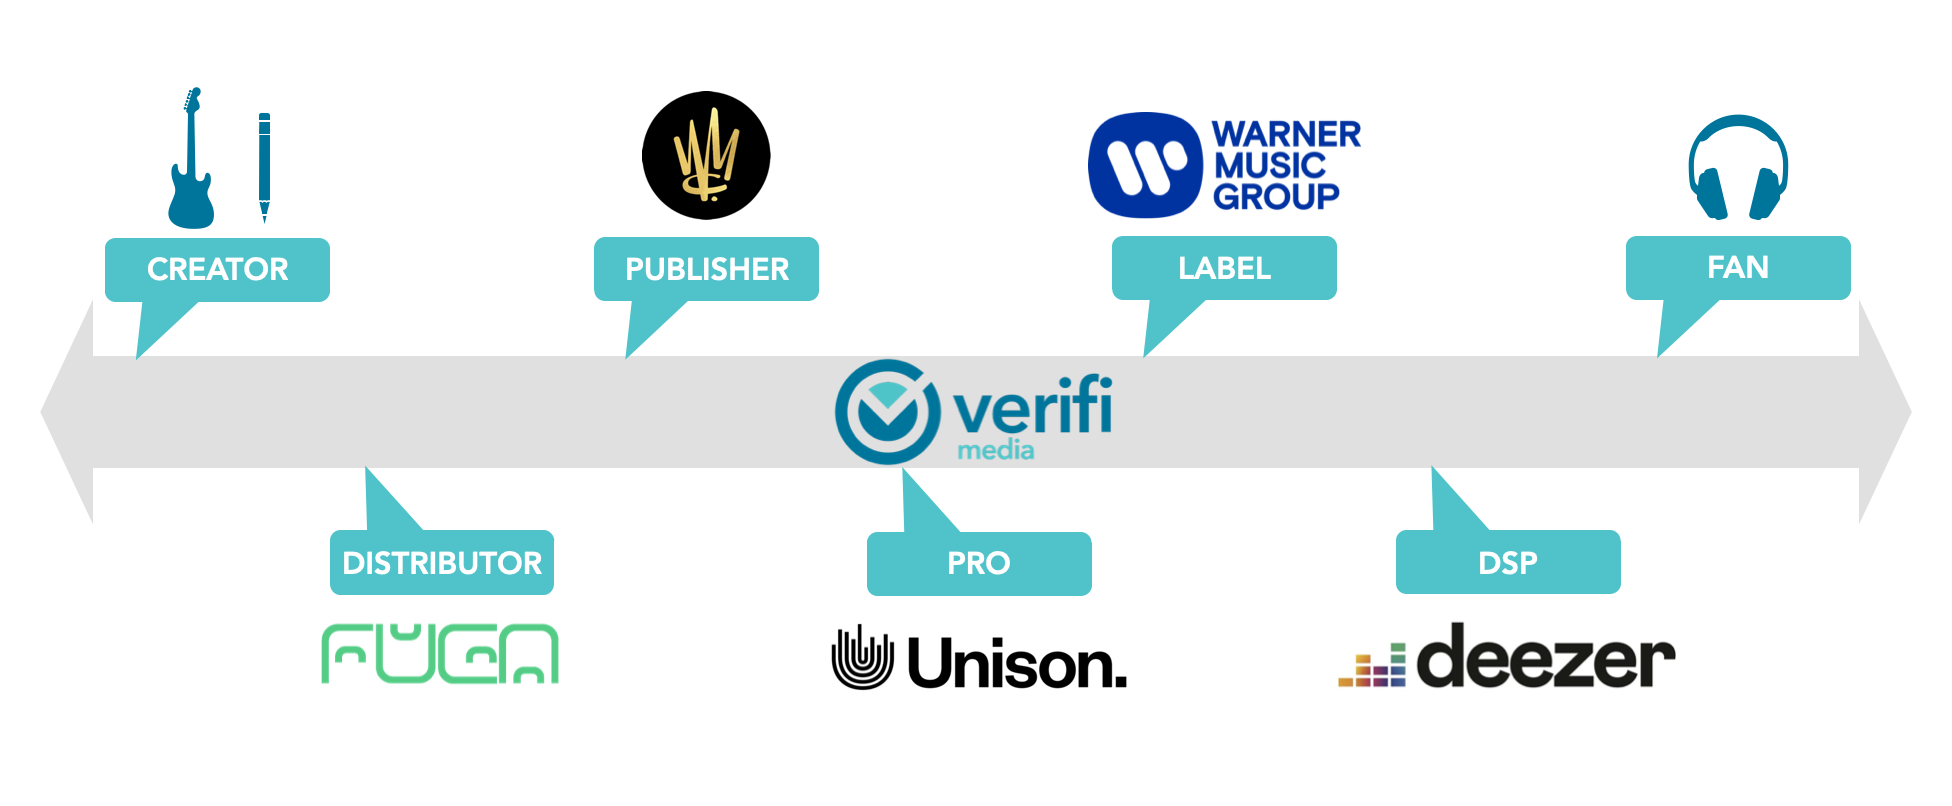 ‘Verifi Rights Data Alliance’ Launches with Inaugural Members Warner Music Group, Unison, Deezer, and FUGA